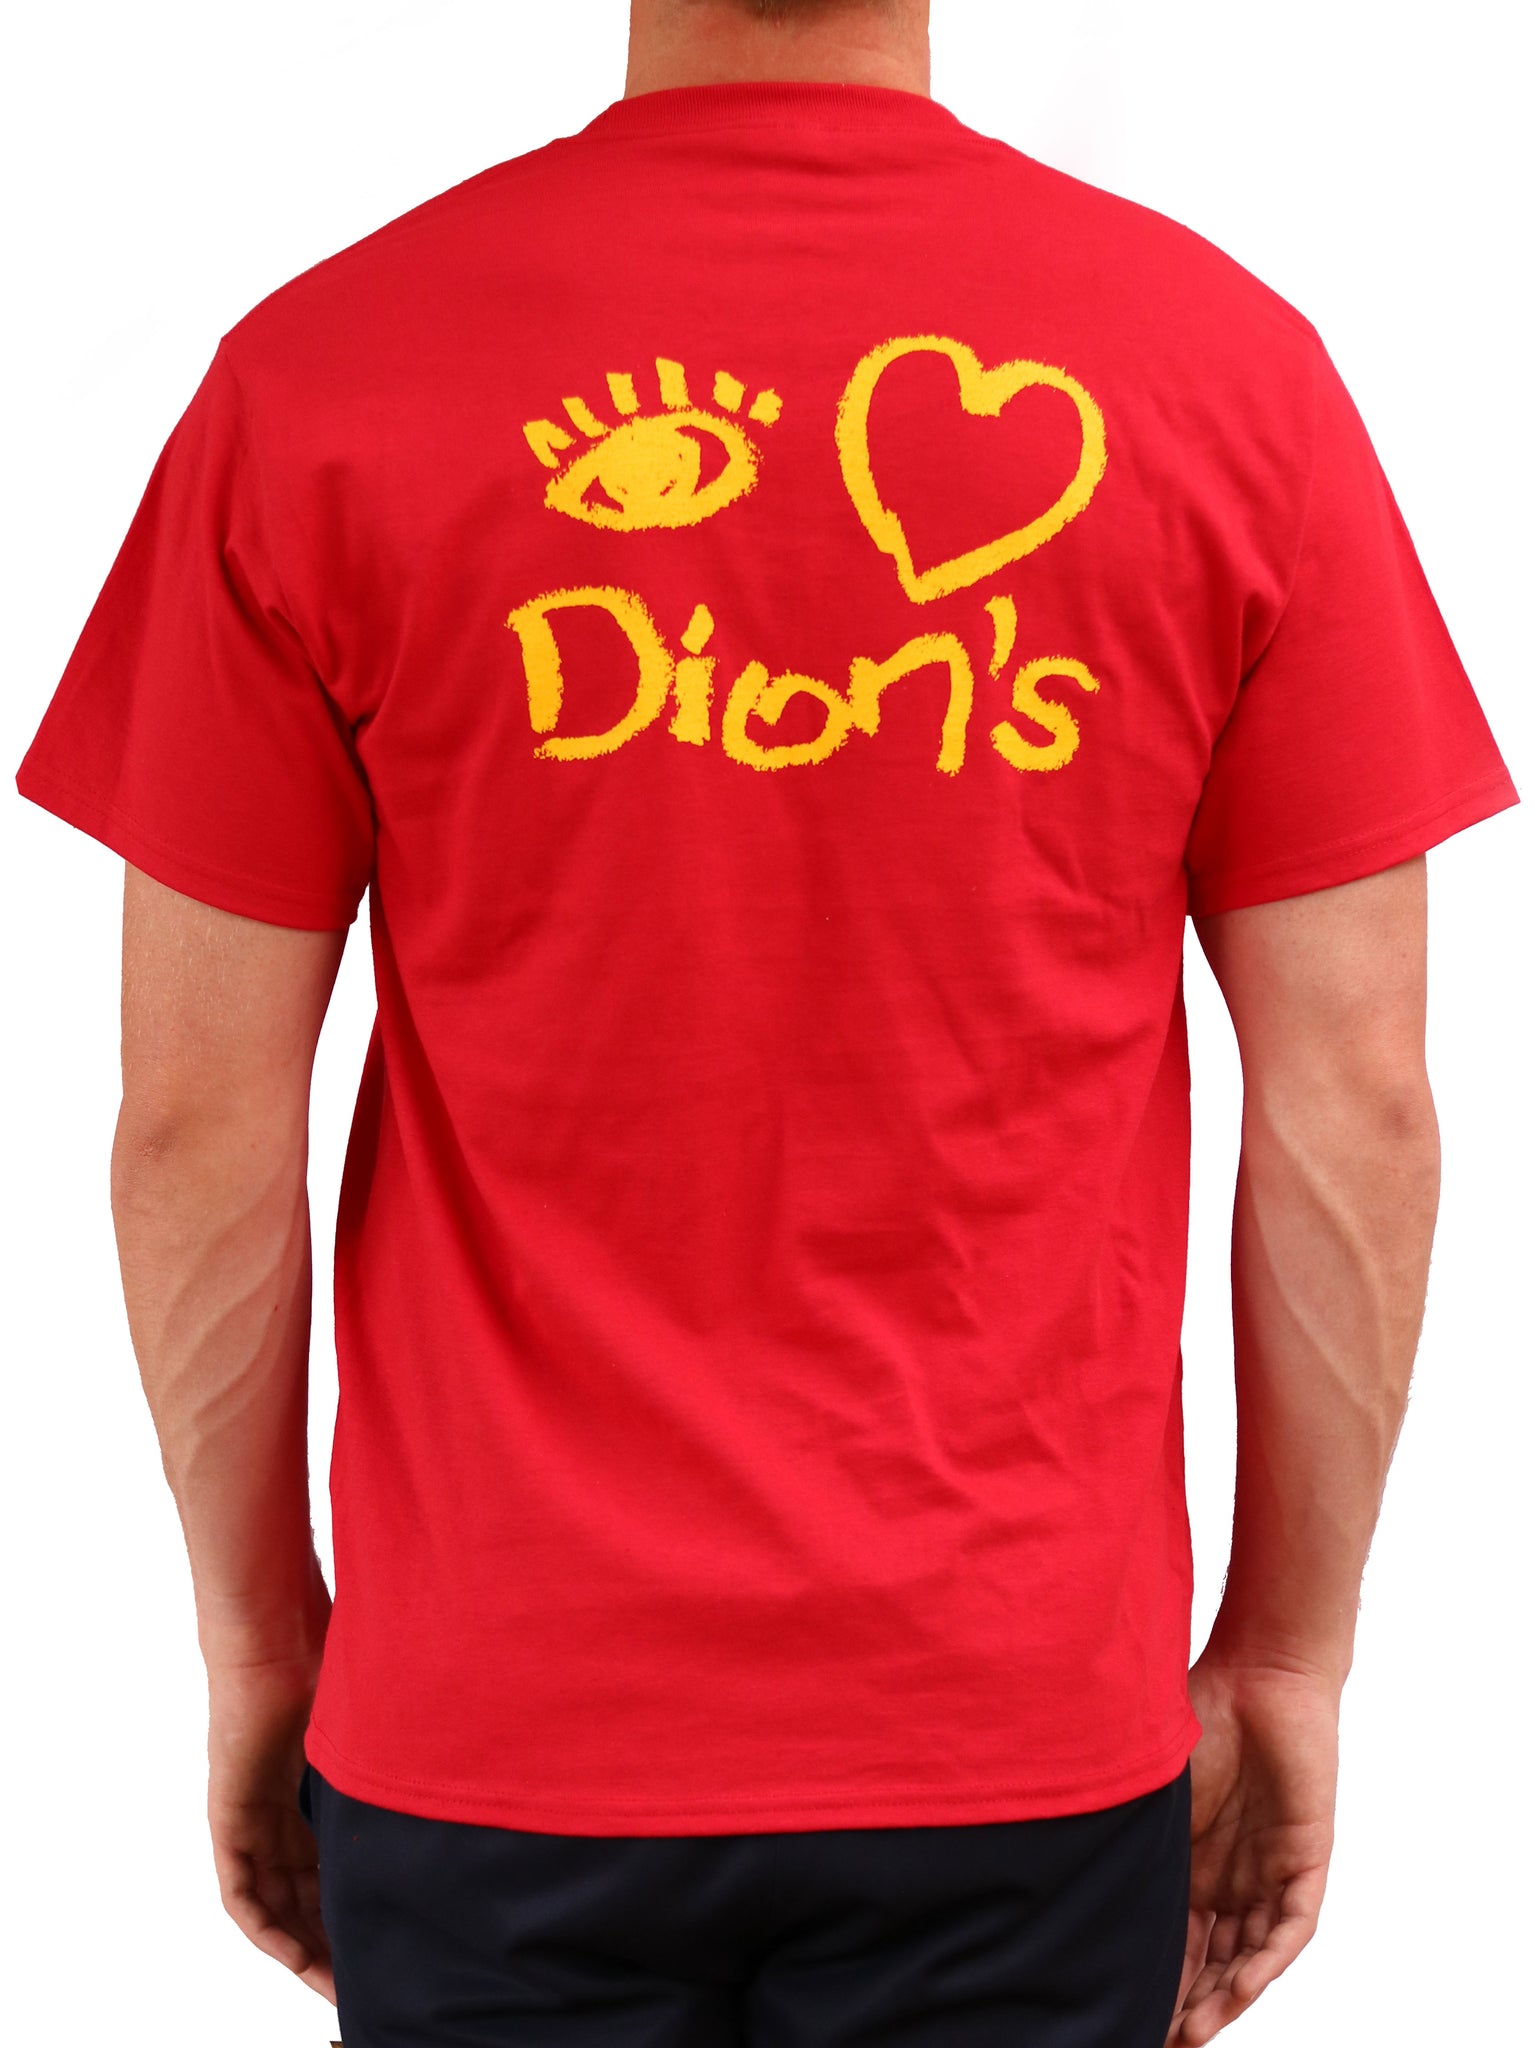 The back of a man wearing a red Dion's Fan Shop Tour Tee.